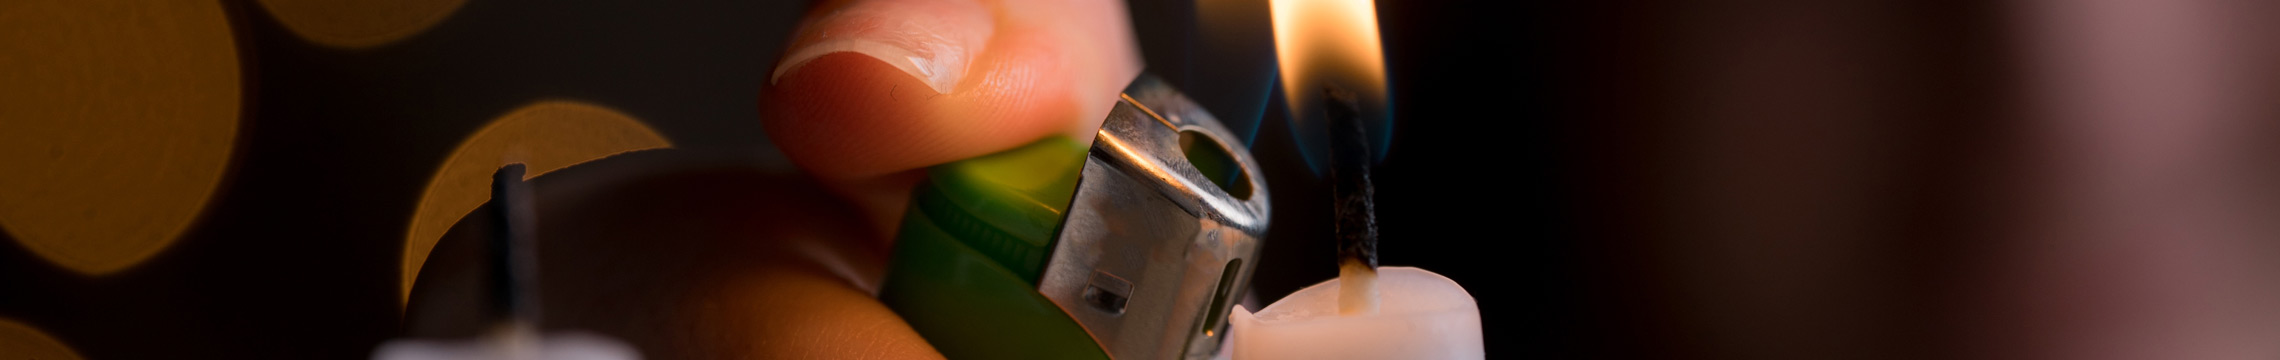 Close up of a hand using a green lighter to light a white candle